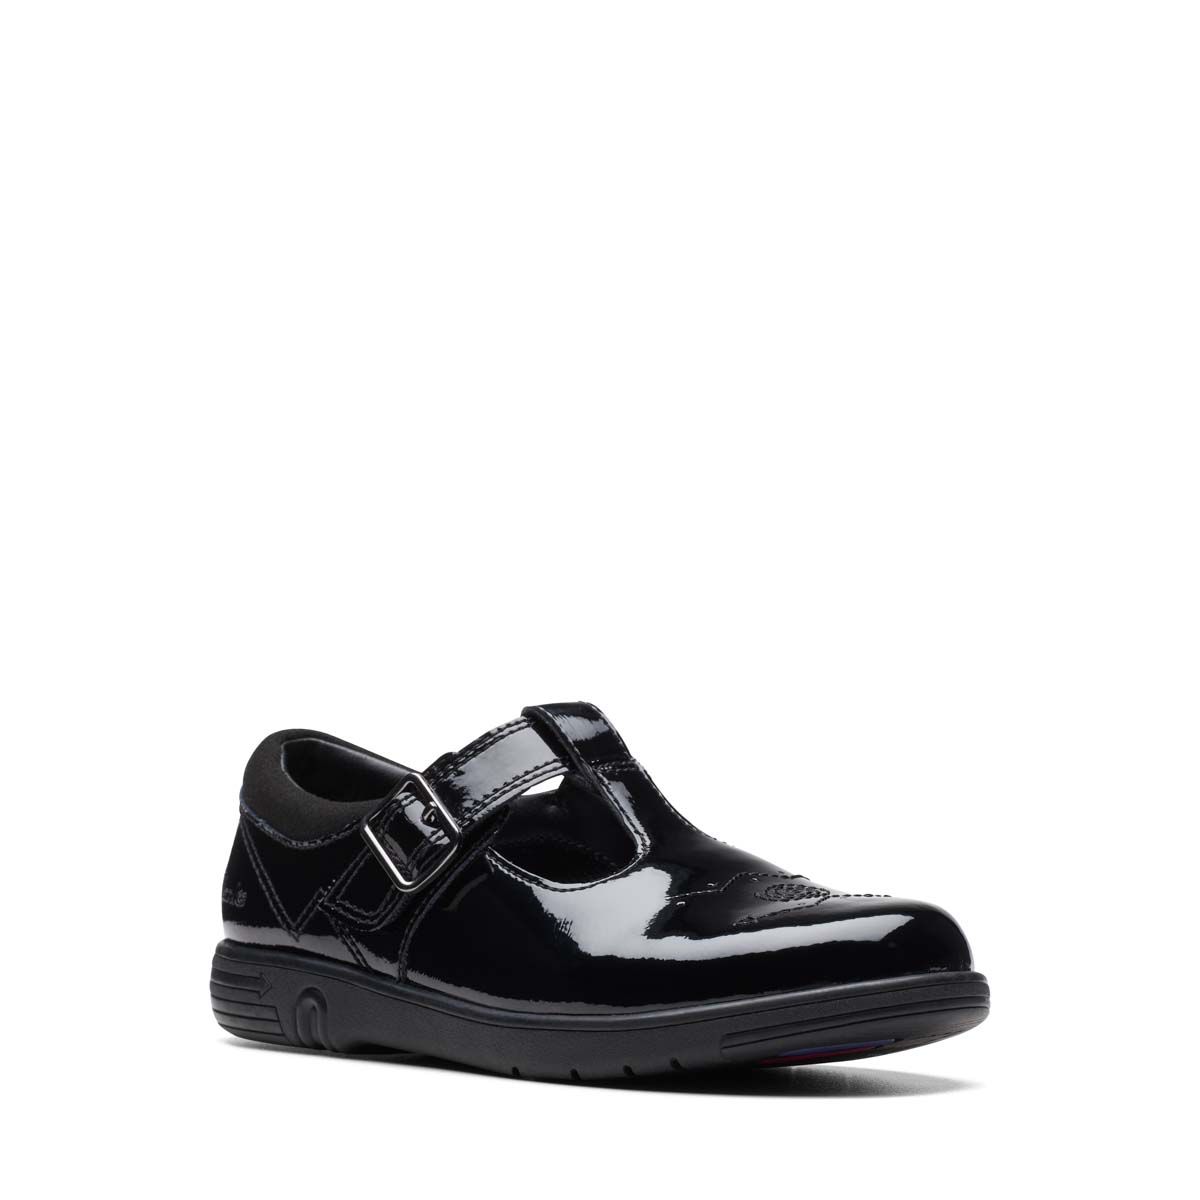 Clarks Jazzy Tap T Bar Black Patent Kids Girls School Shoes 753076F In Size 13.5 In Plain Black Patent F Width Fitting Regular Fit For School For kids